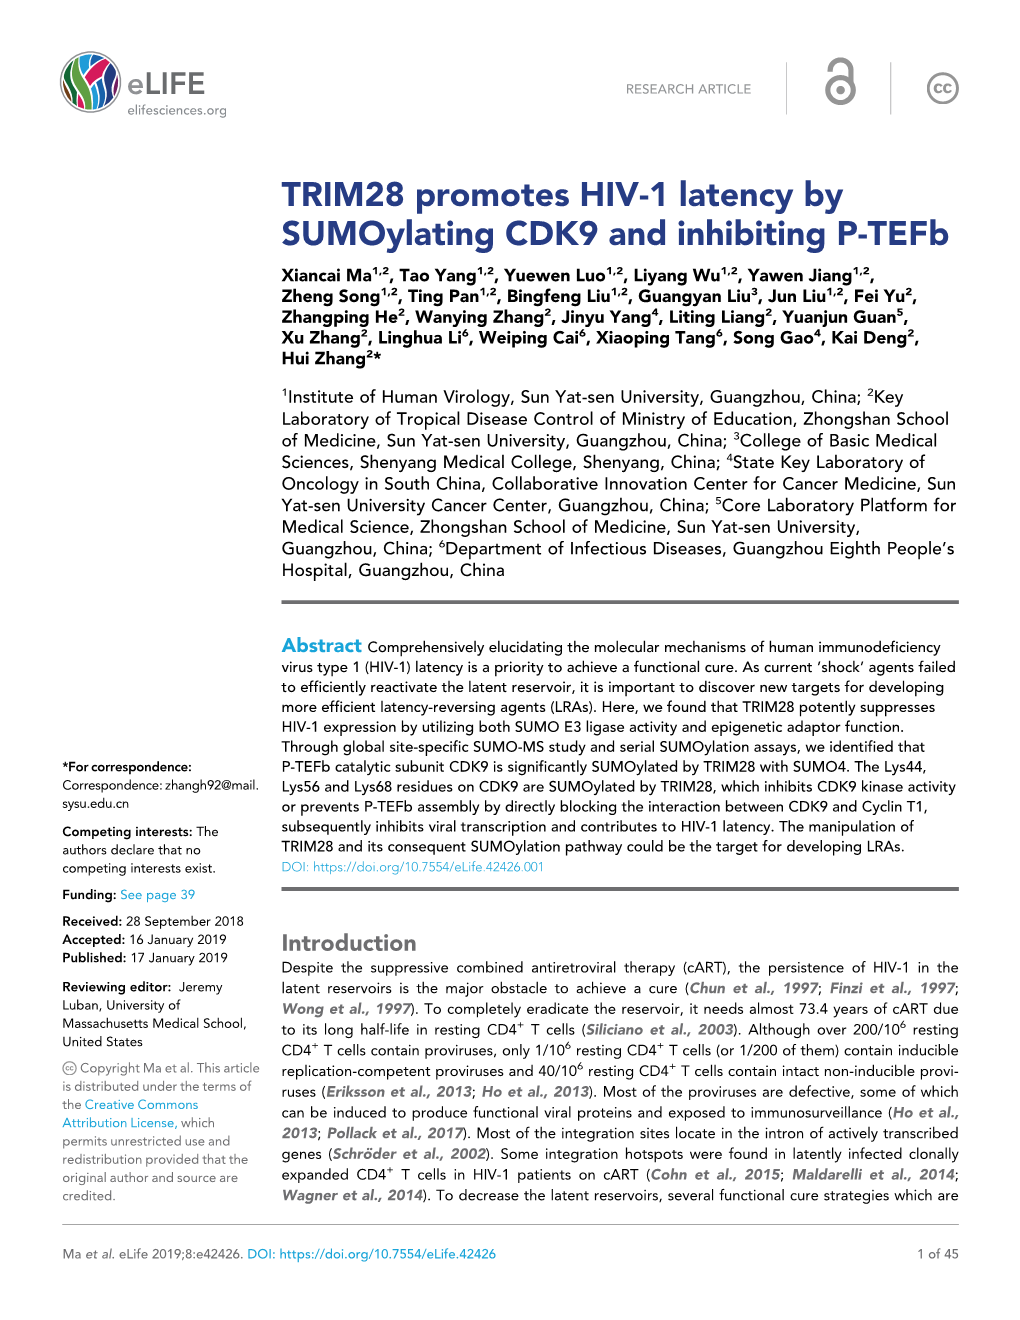 TRIM28 Promotes HIV-1 Latency by Sumoylating CDK9 and Inhibiting